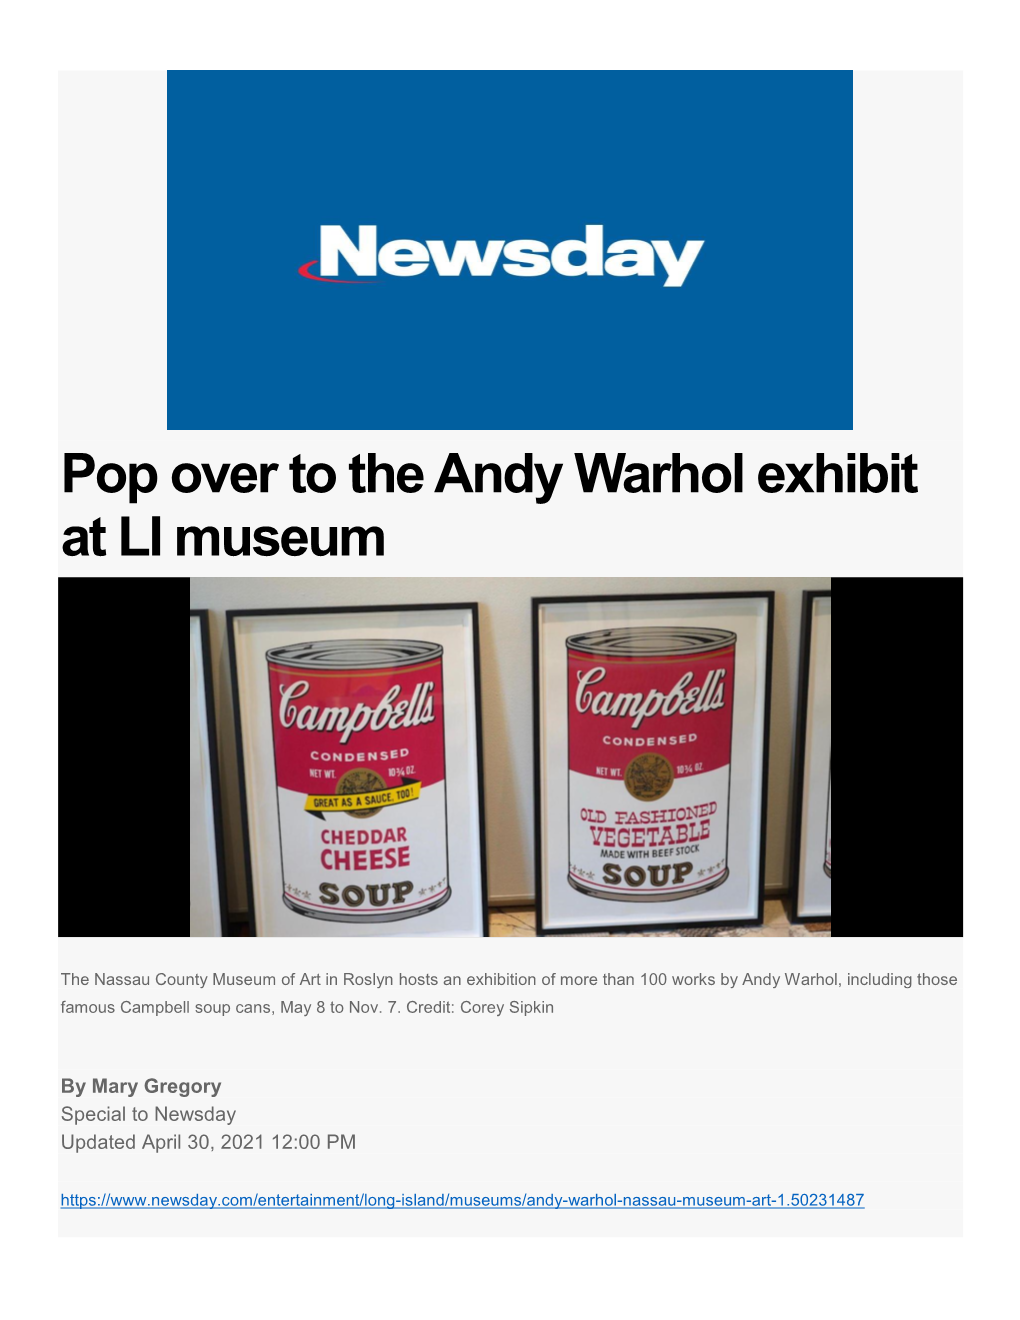 Pop Over to the Andy Warhol Exhibit at LI Museum